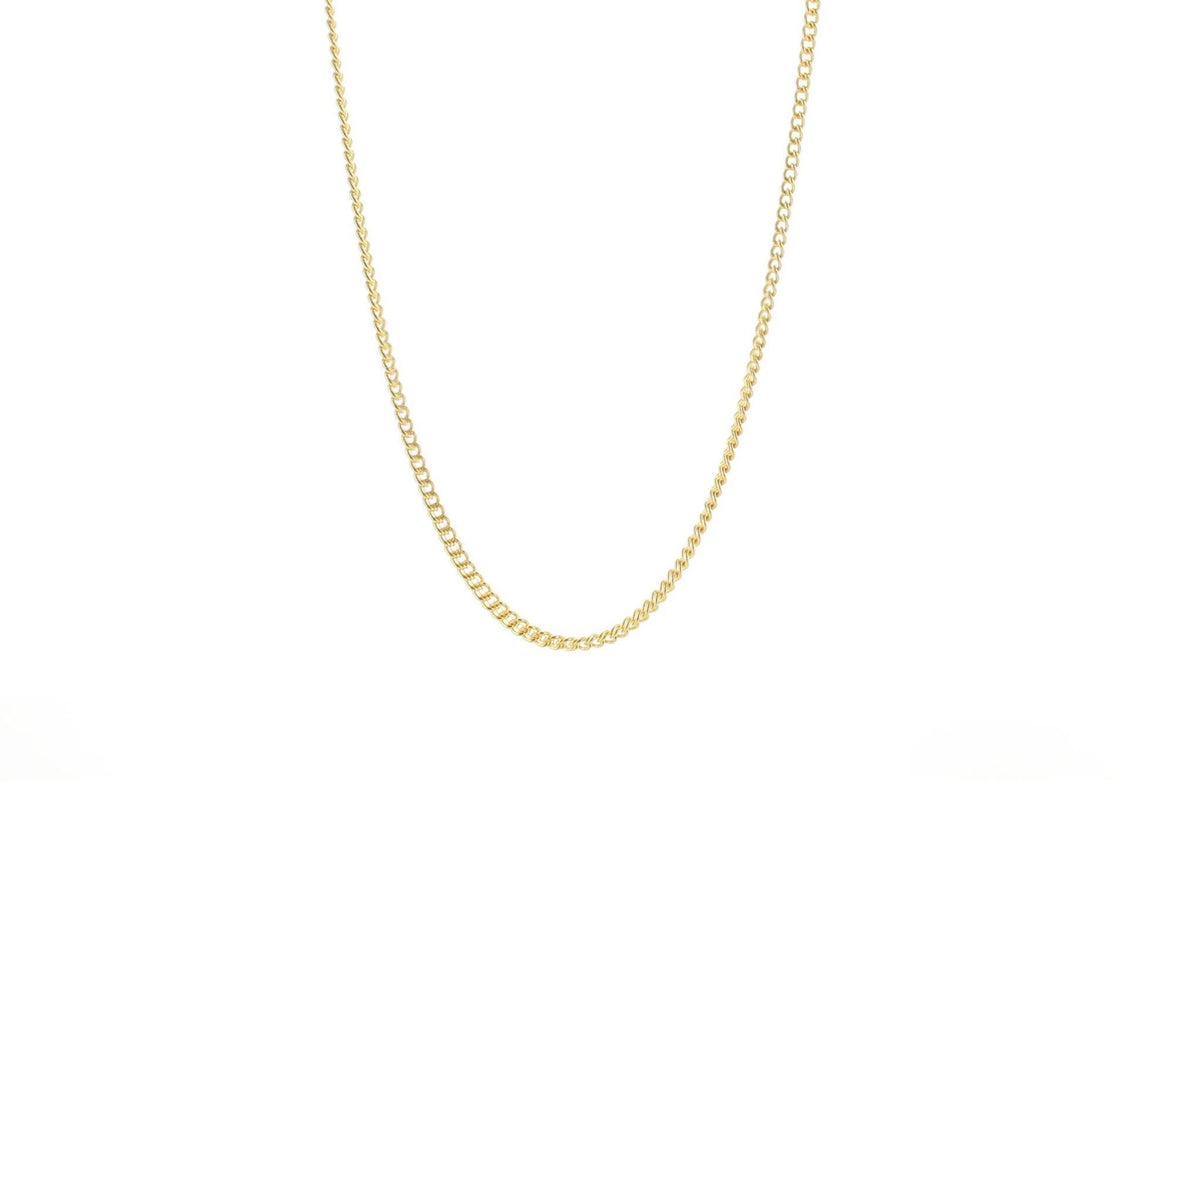 CHARMING 14-17&quot; SHORT NECKLACE GOLD - SO PRETTY CARA COTTER